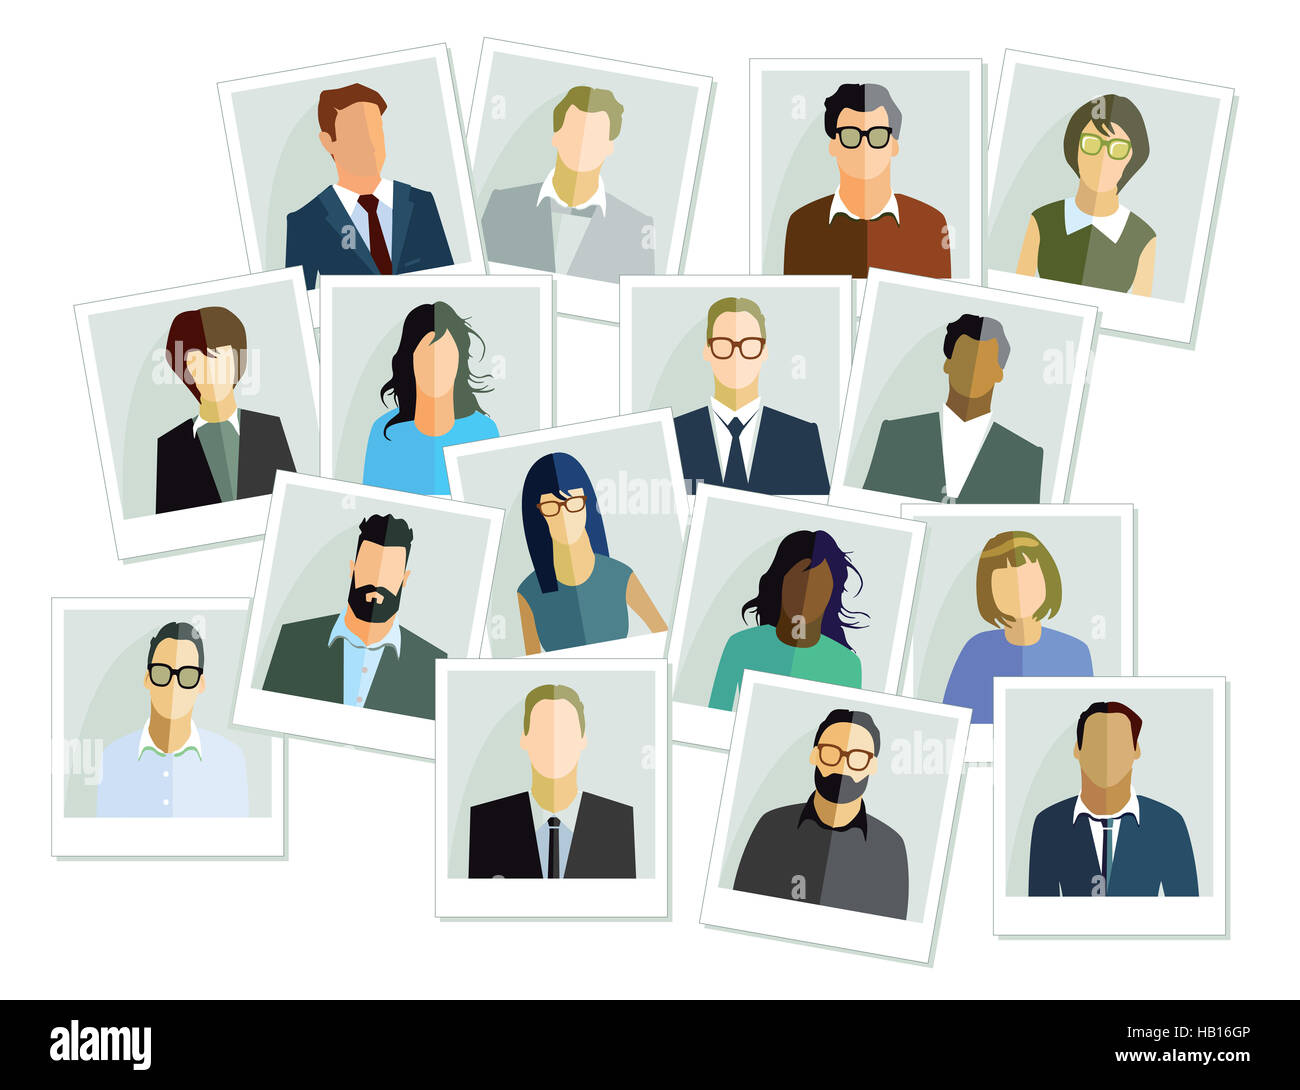 people images Stock Photo